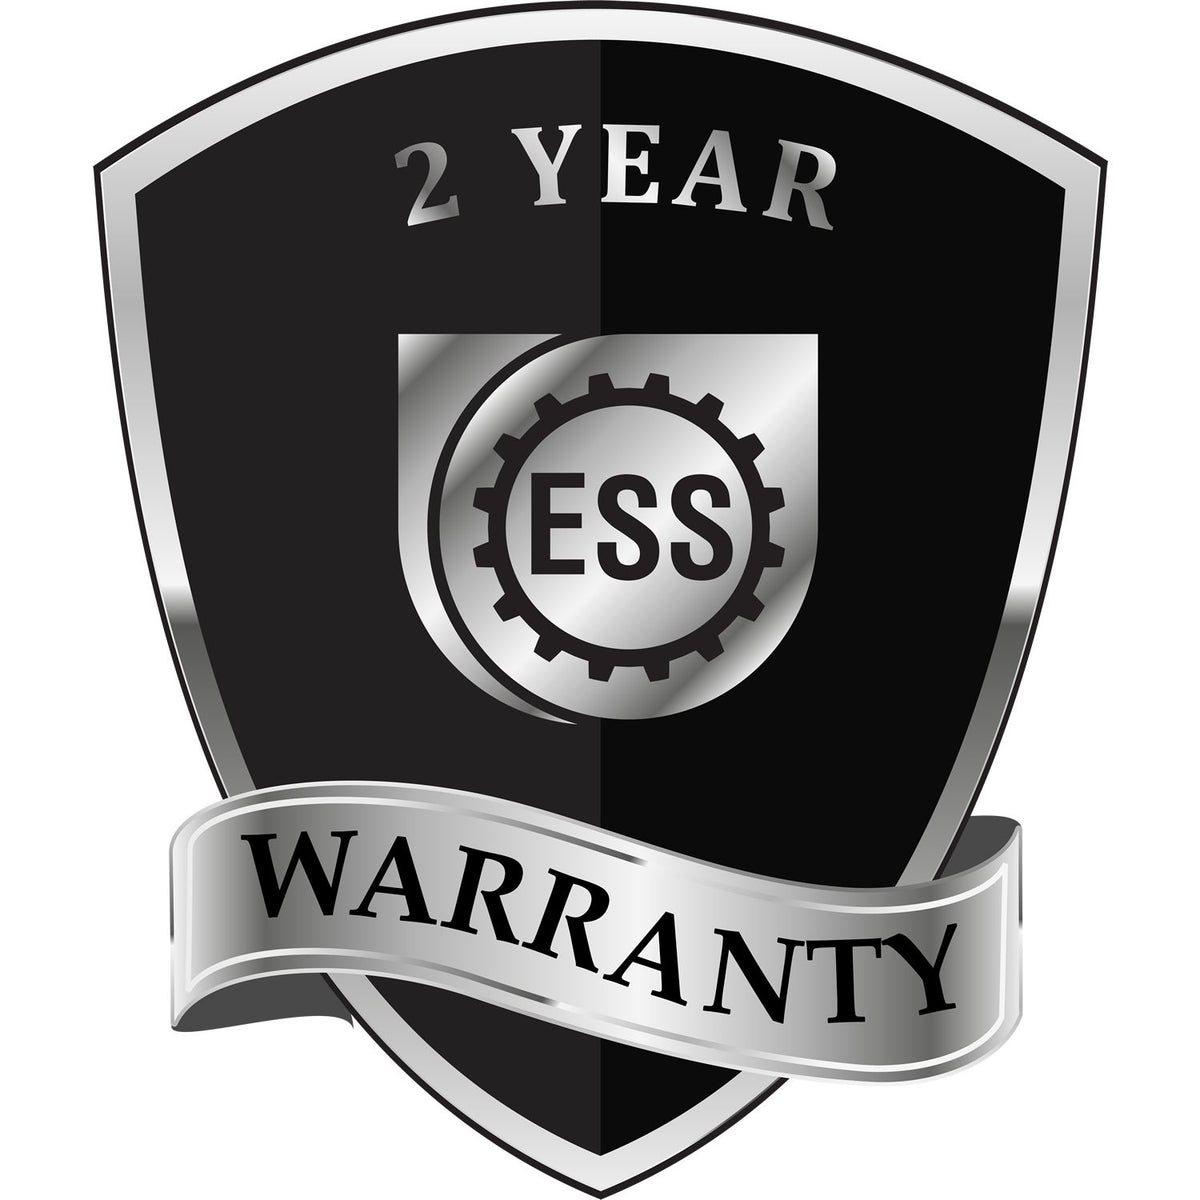 A badge or emblem showing a warranty icon for the Extended Long Reach Indiana Architect Seal Embosser